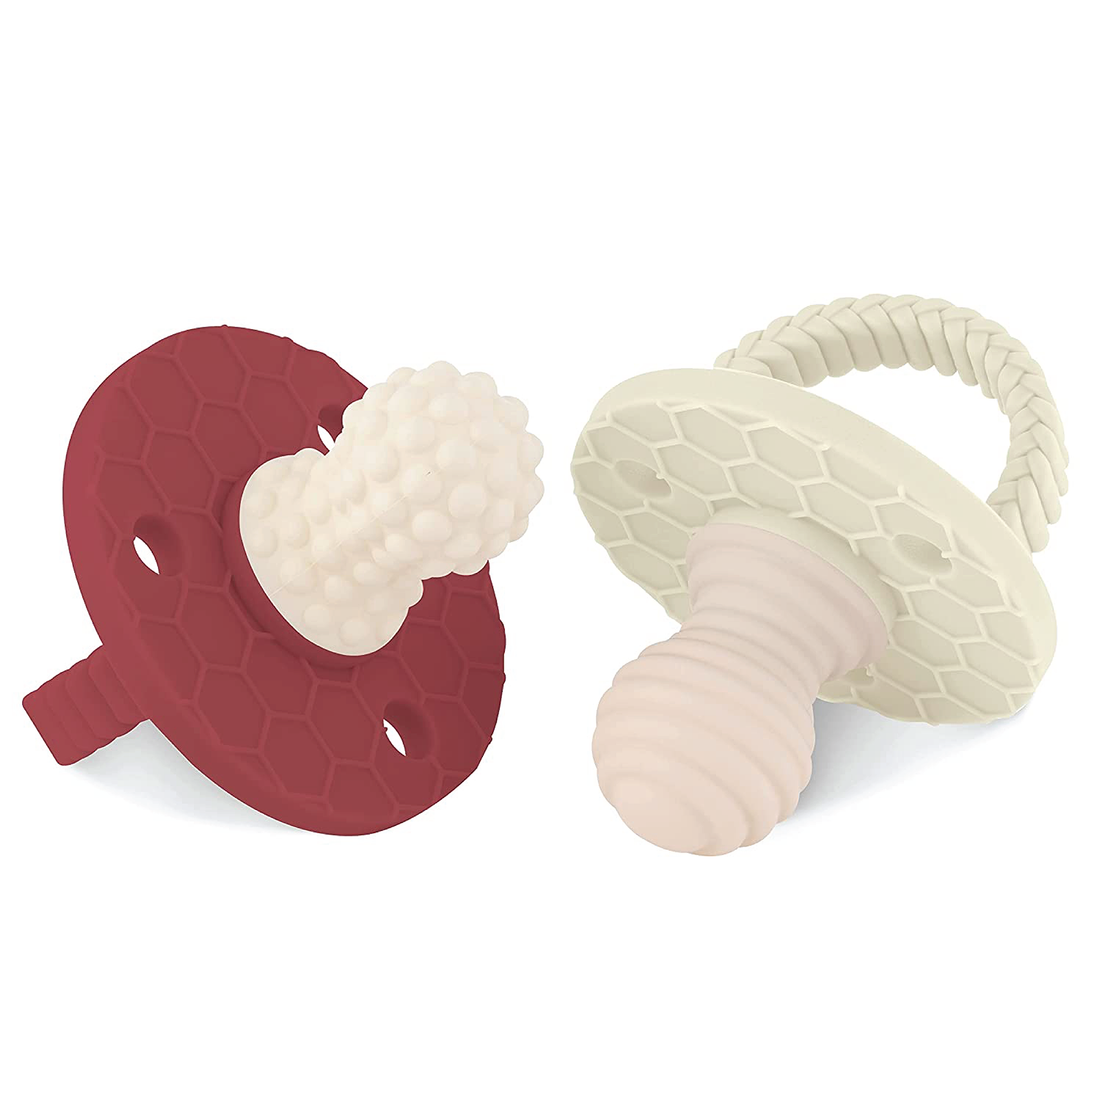 SoothiPop Silicone Teething Pacifier Round Shaped (2 Pack) - Burgundy and Cream